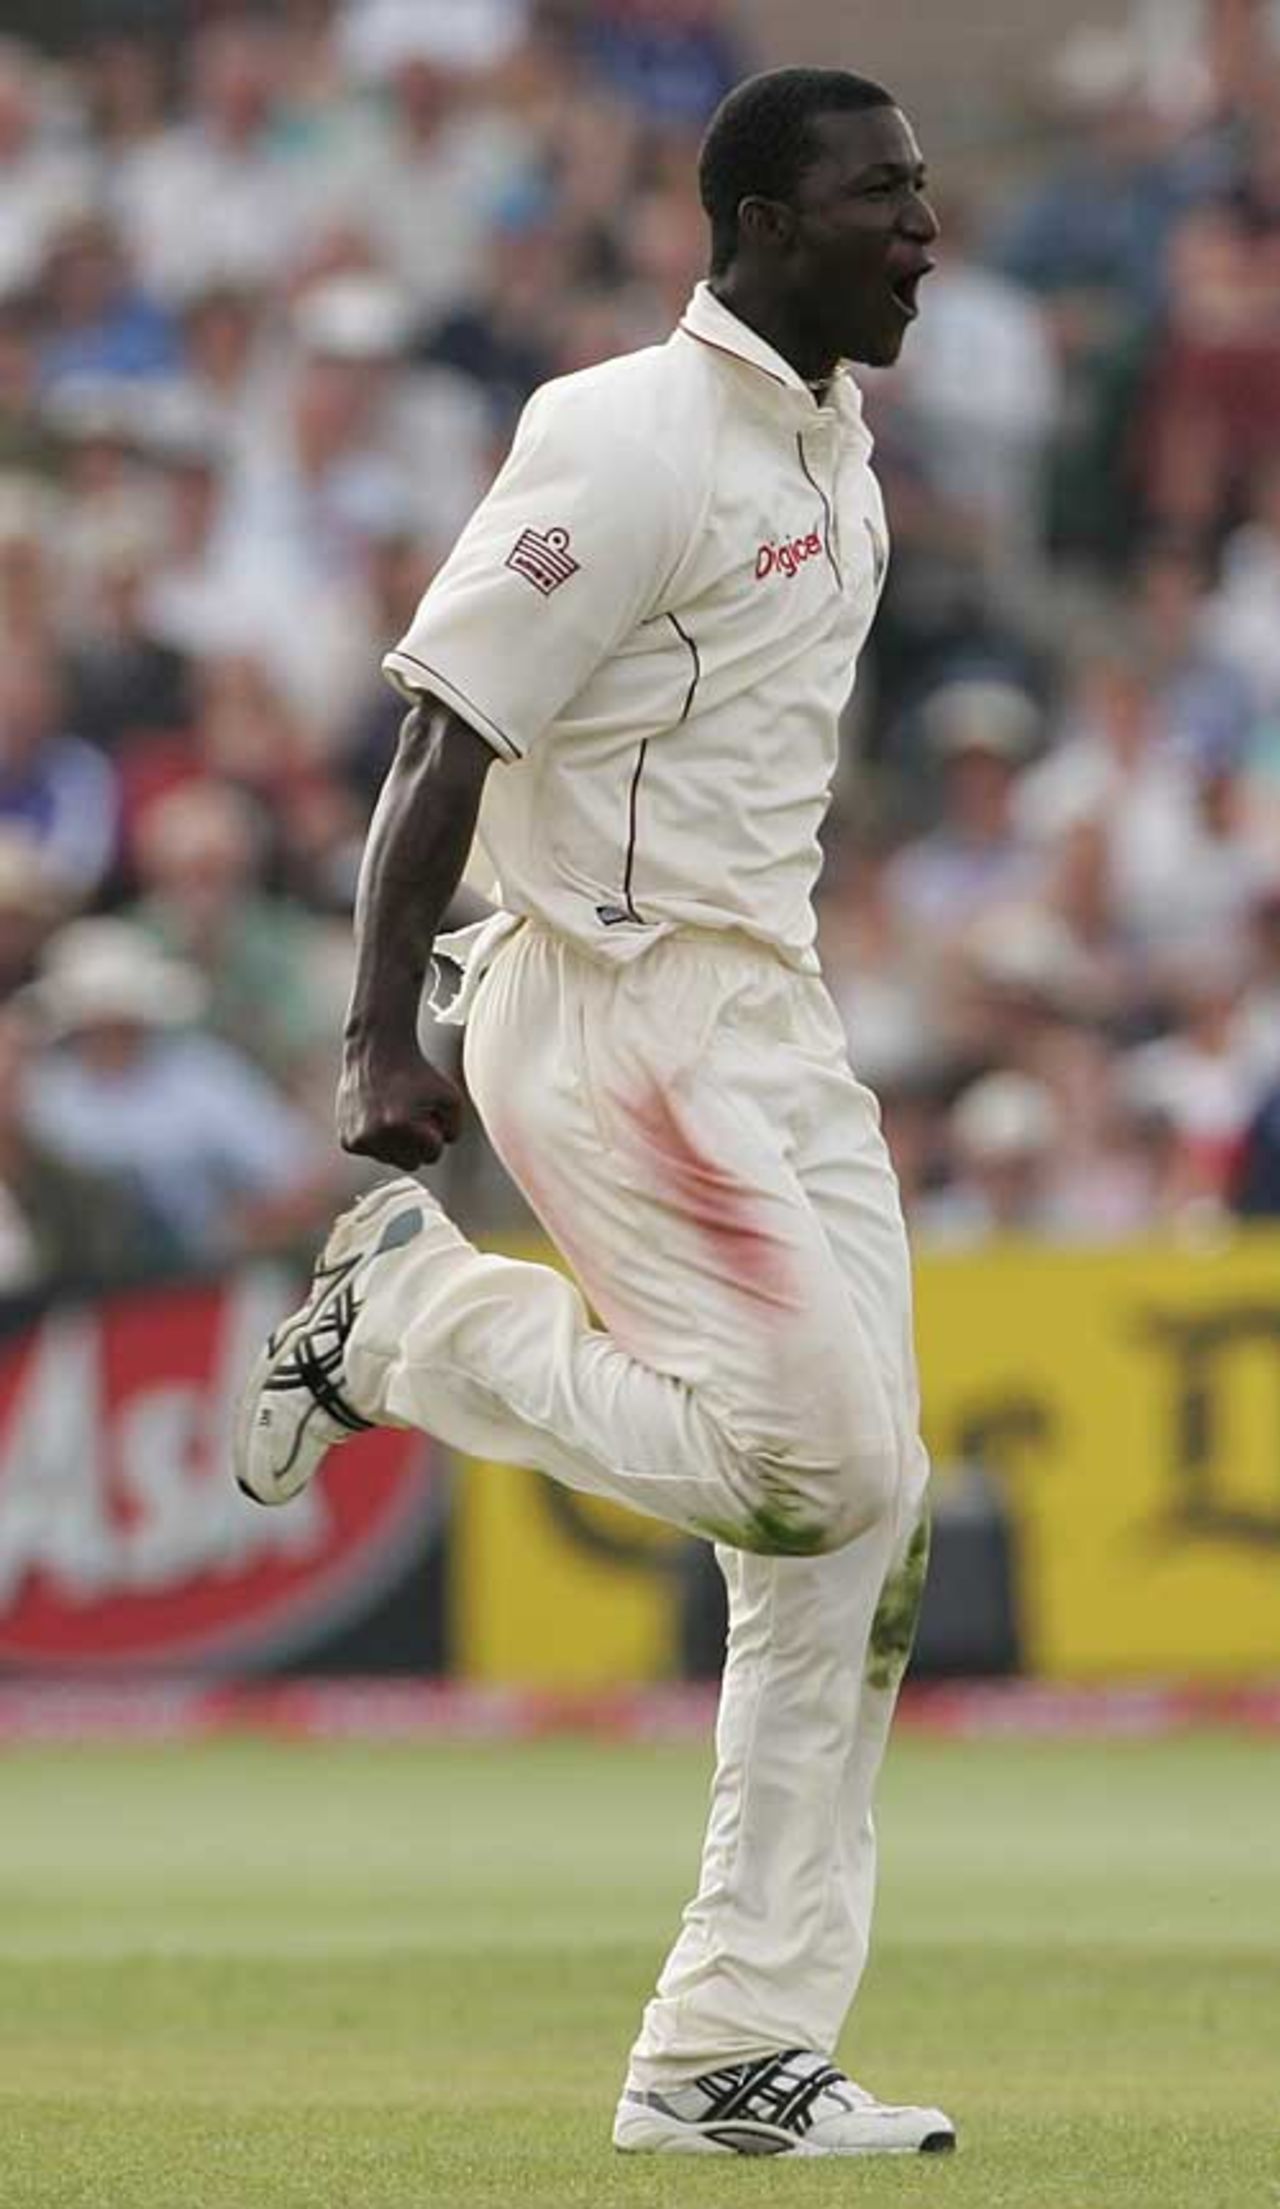 Darren Sammy celebrates one of his seven wickets, England v West Indies, 3rd Test, Old Trafford, June 9, 2007